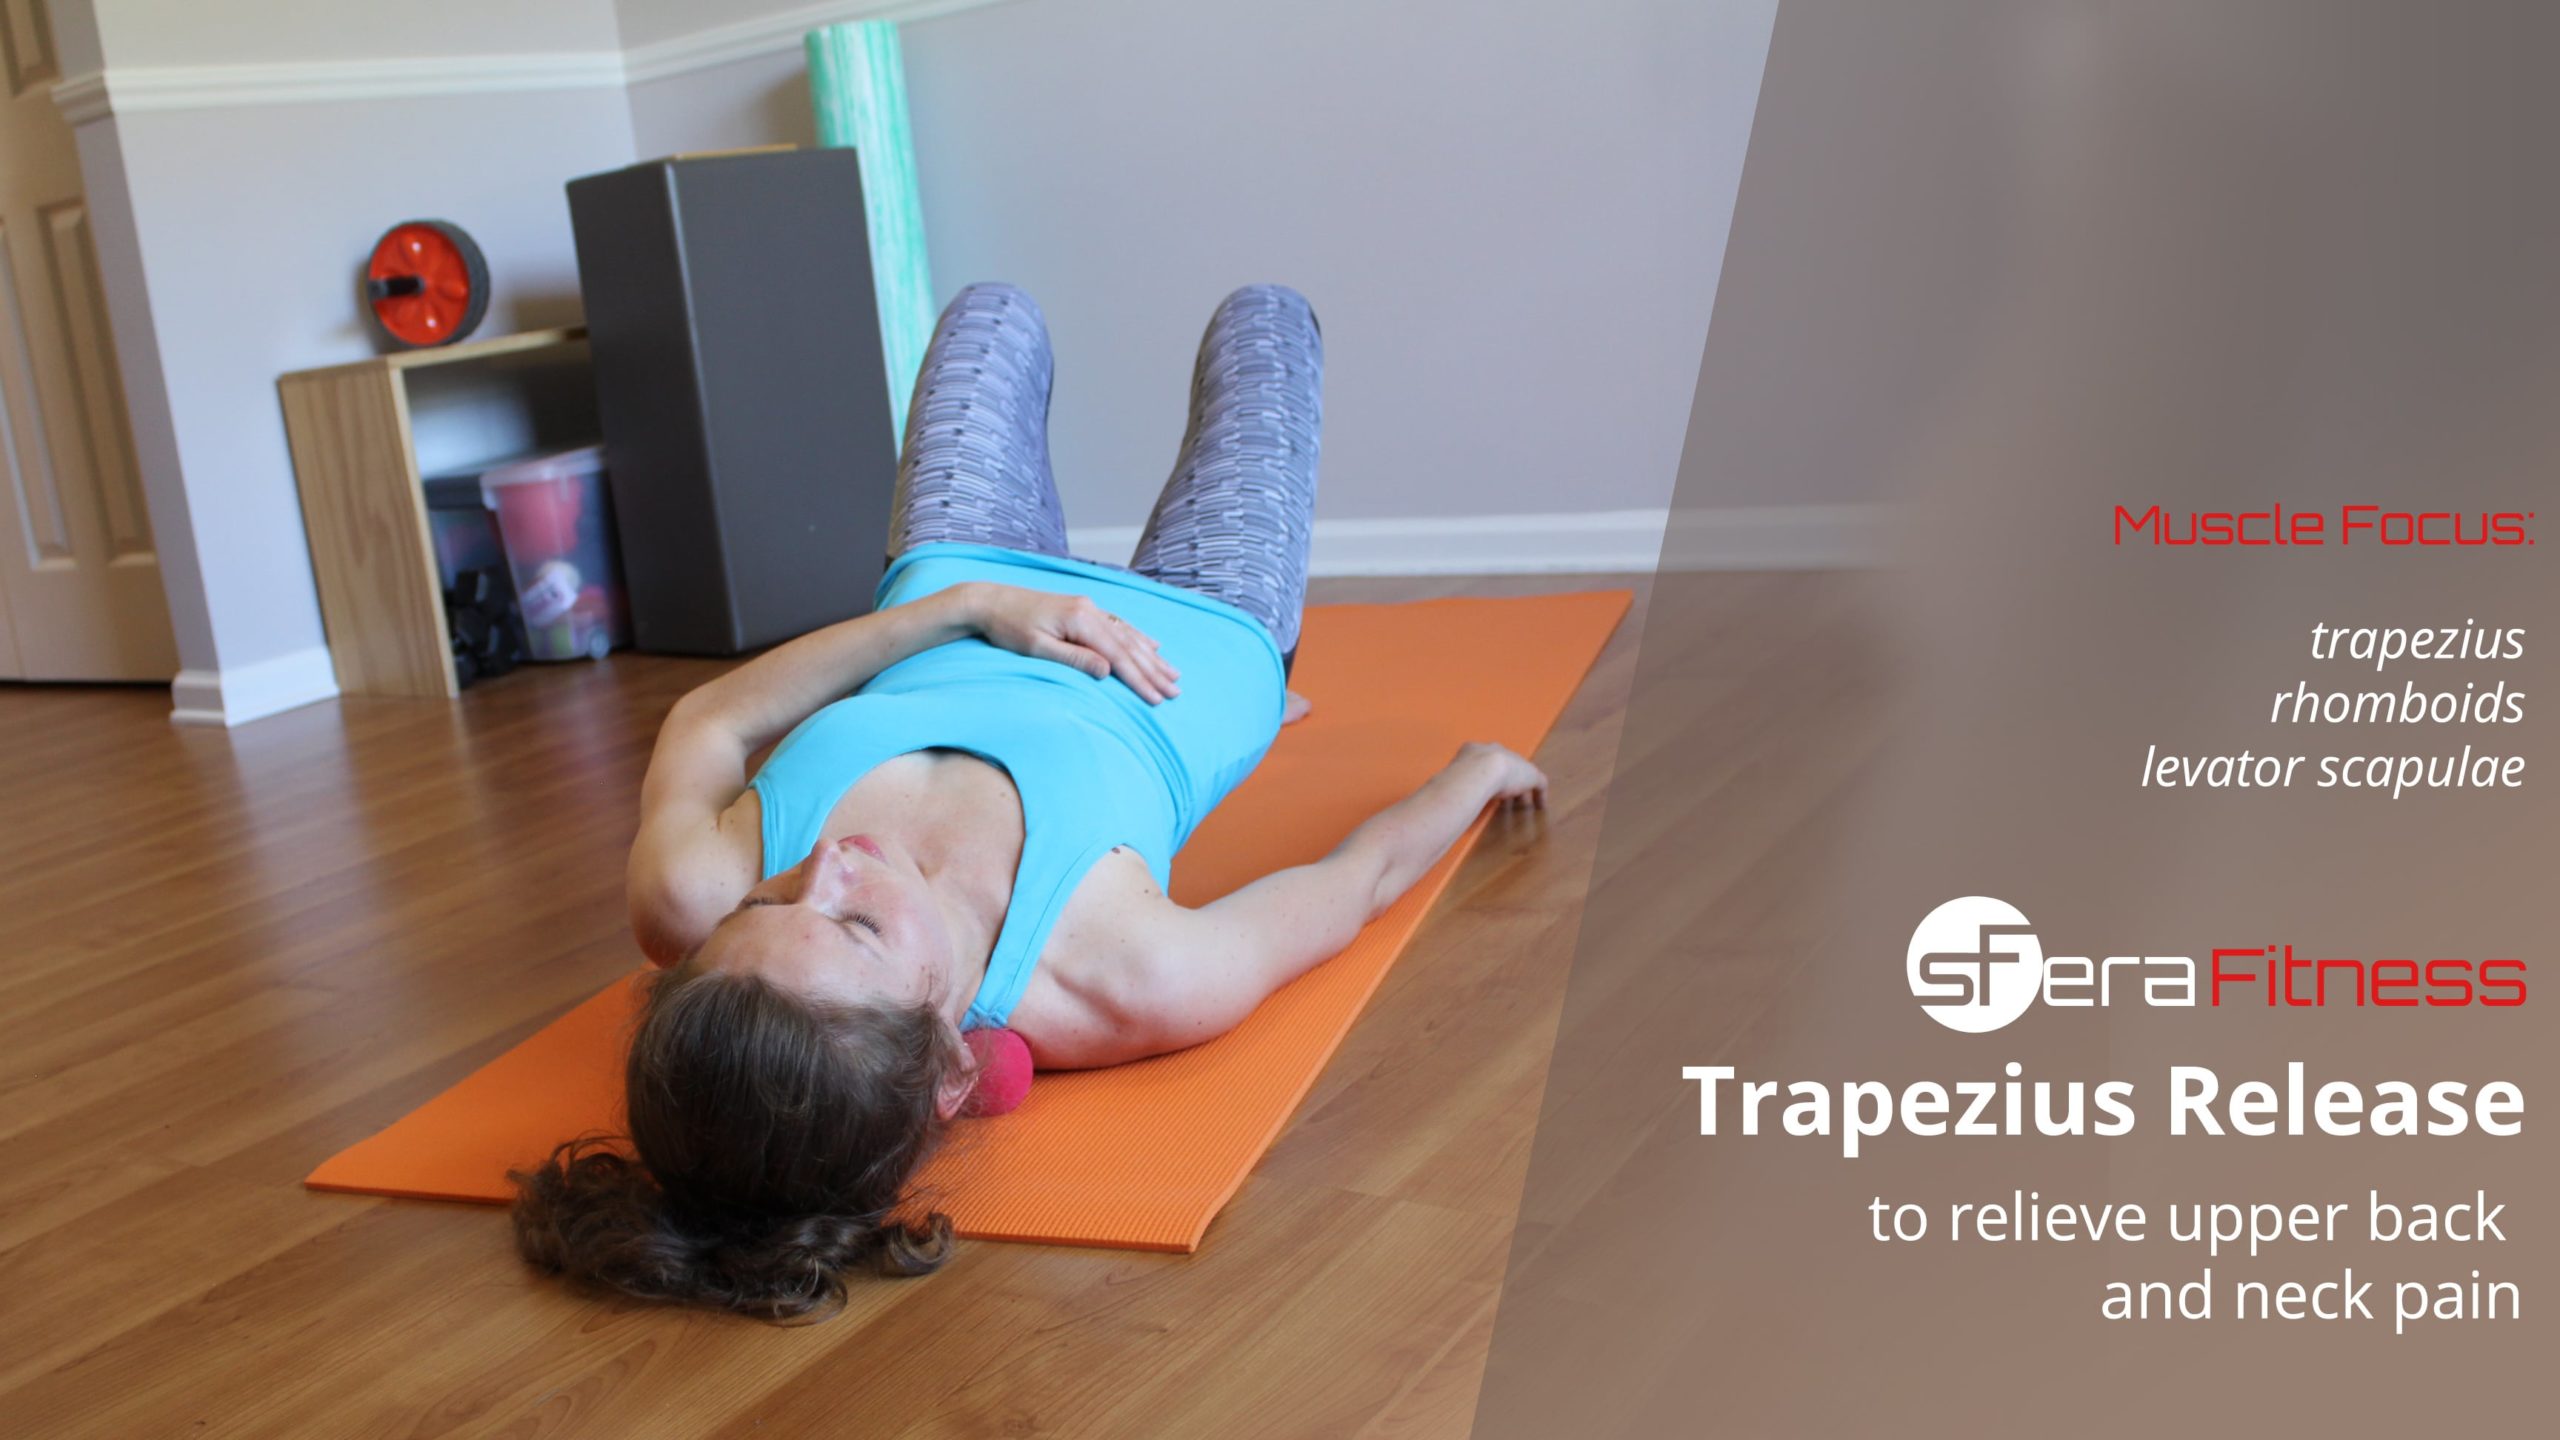 Trapezius Release for Upper Back and Neck Pain Relief